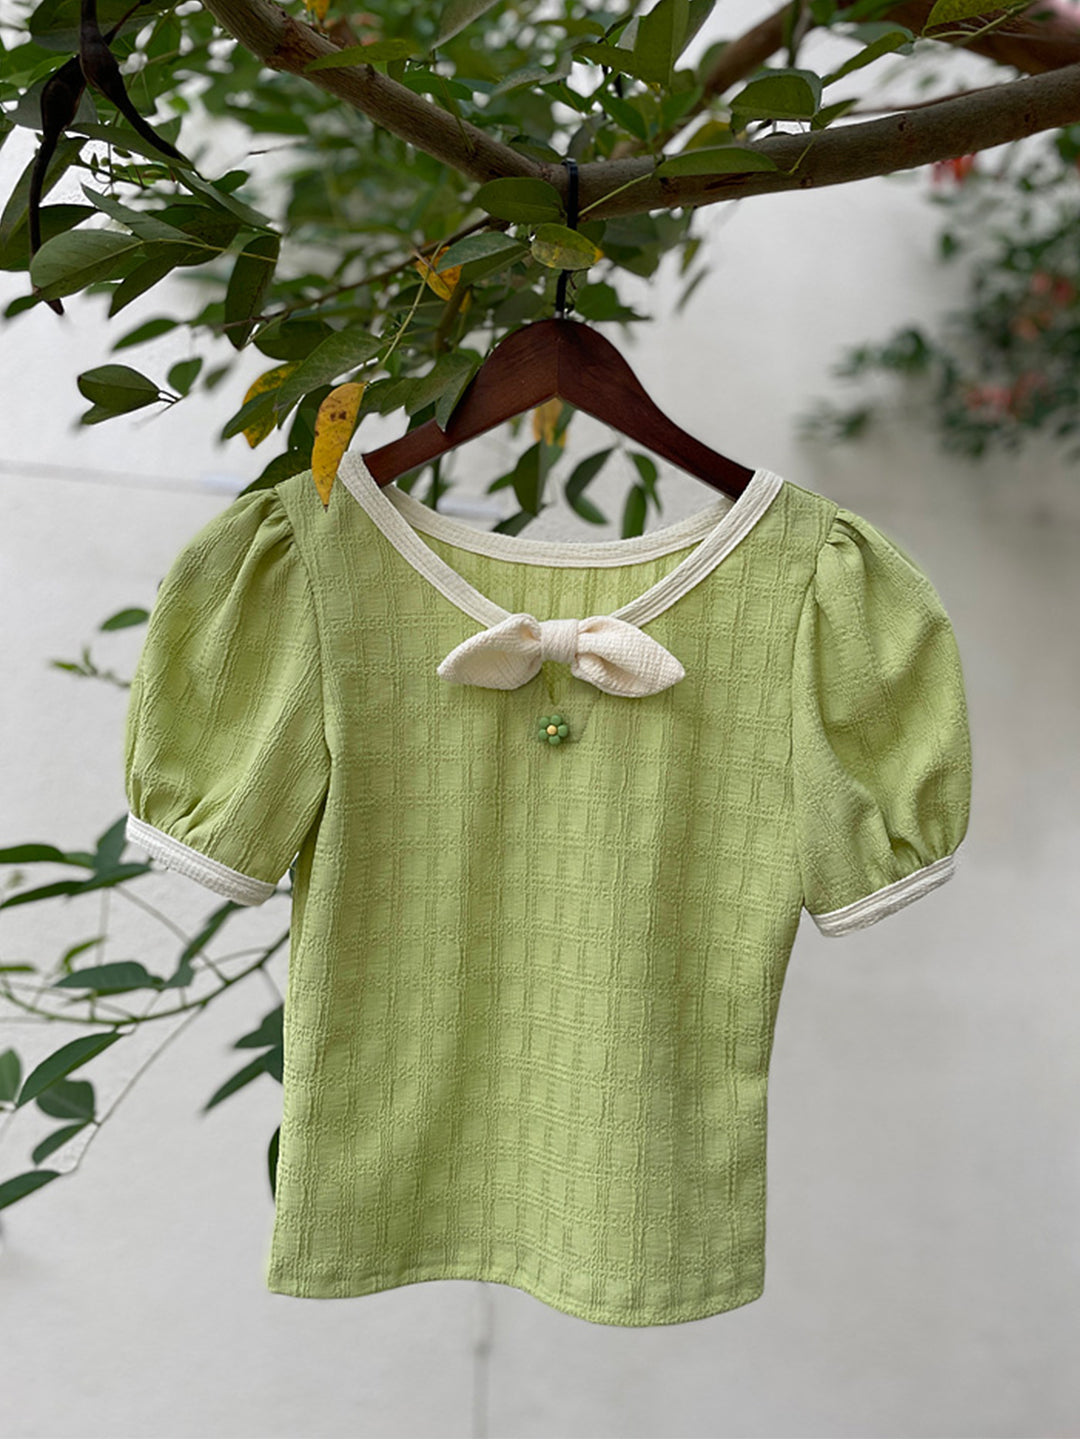 Kaylee French Avocado Green Color French Bow Vintage Top